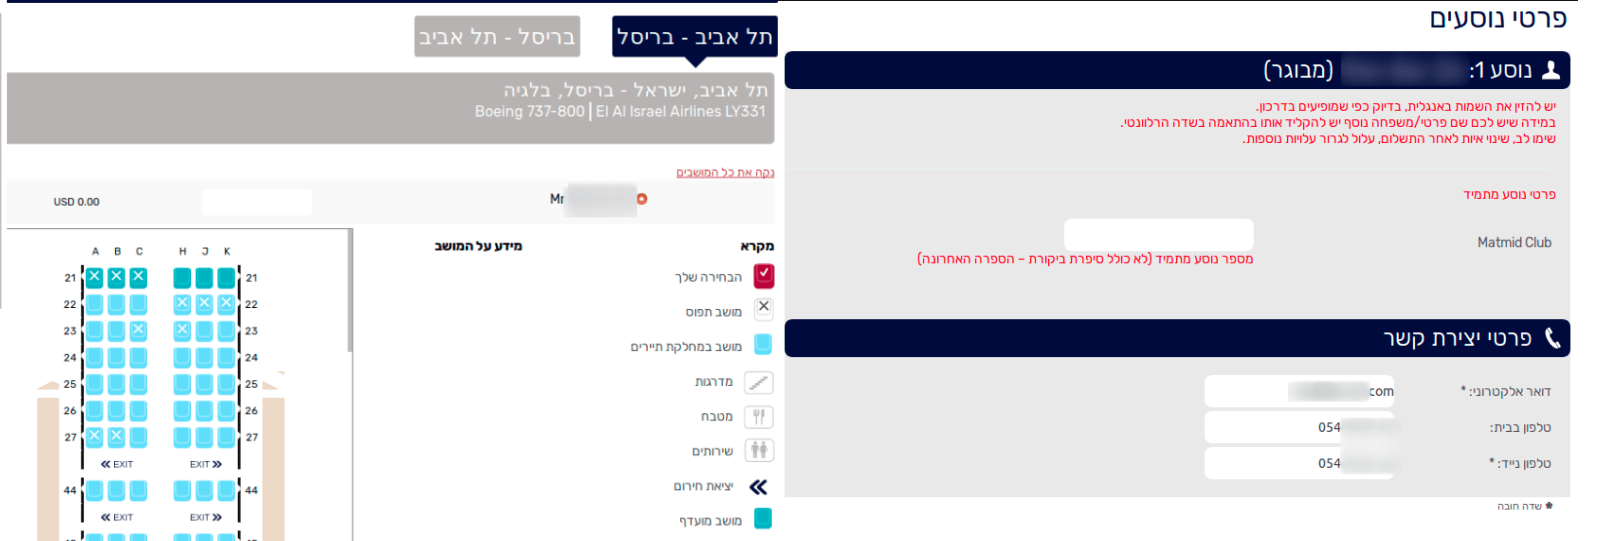 Options that could be changed for every flight (in Hebrew)